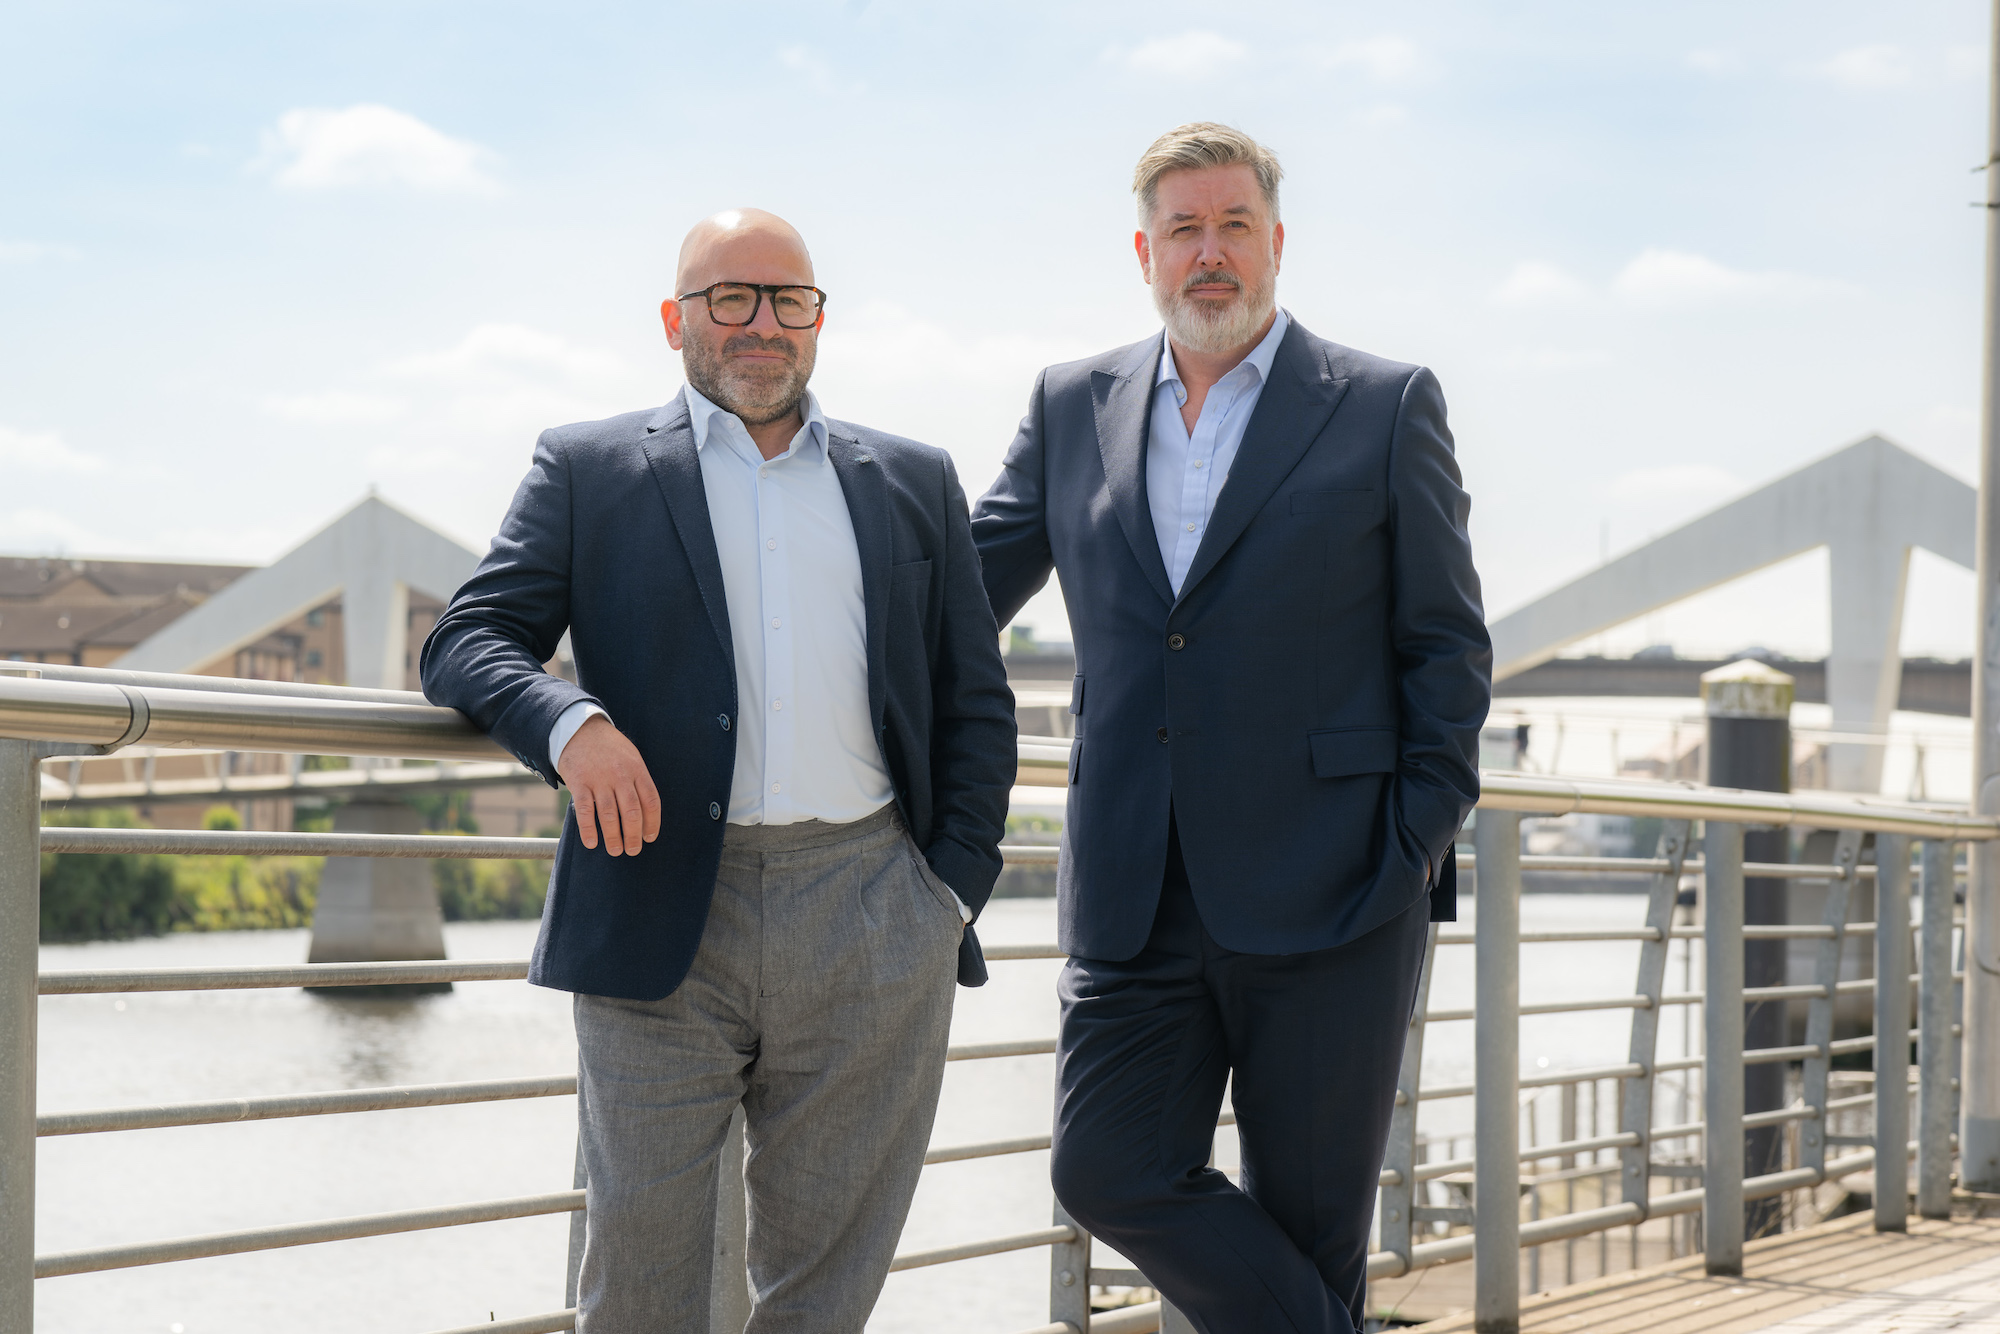 Freeths appoints two partners to lead expansion into Scotland